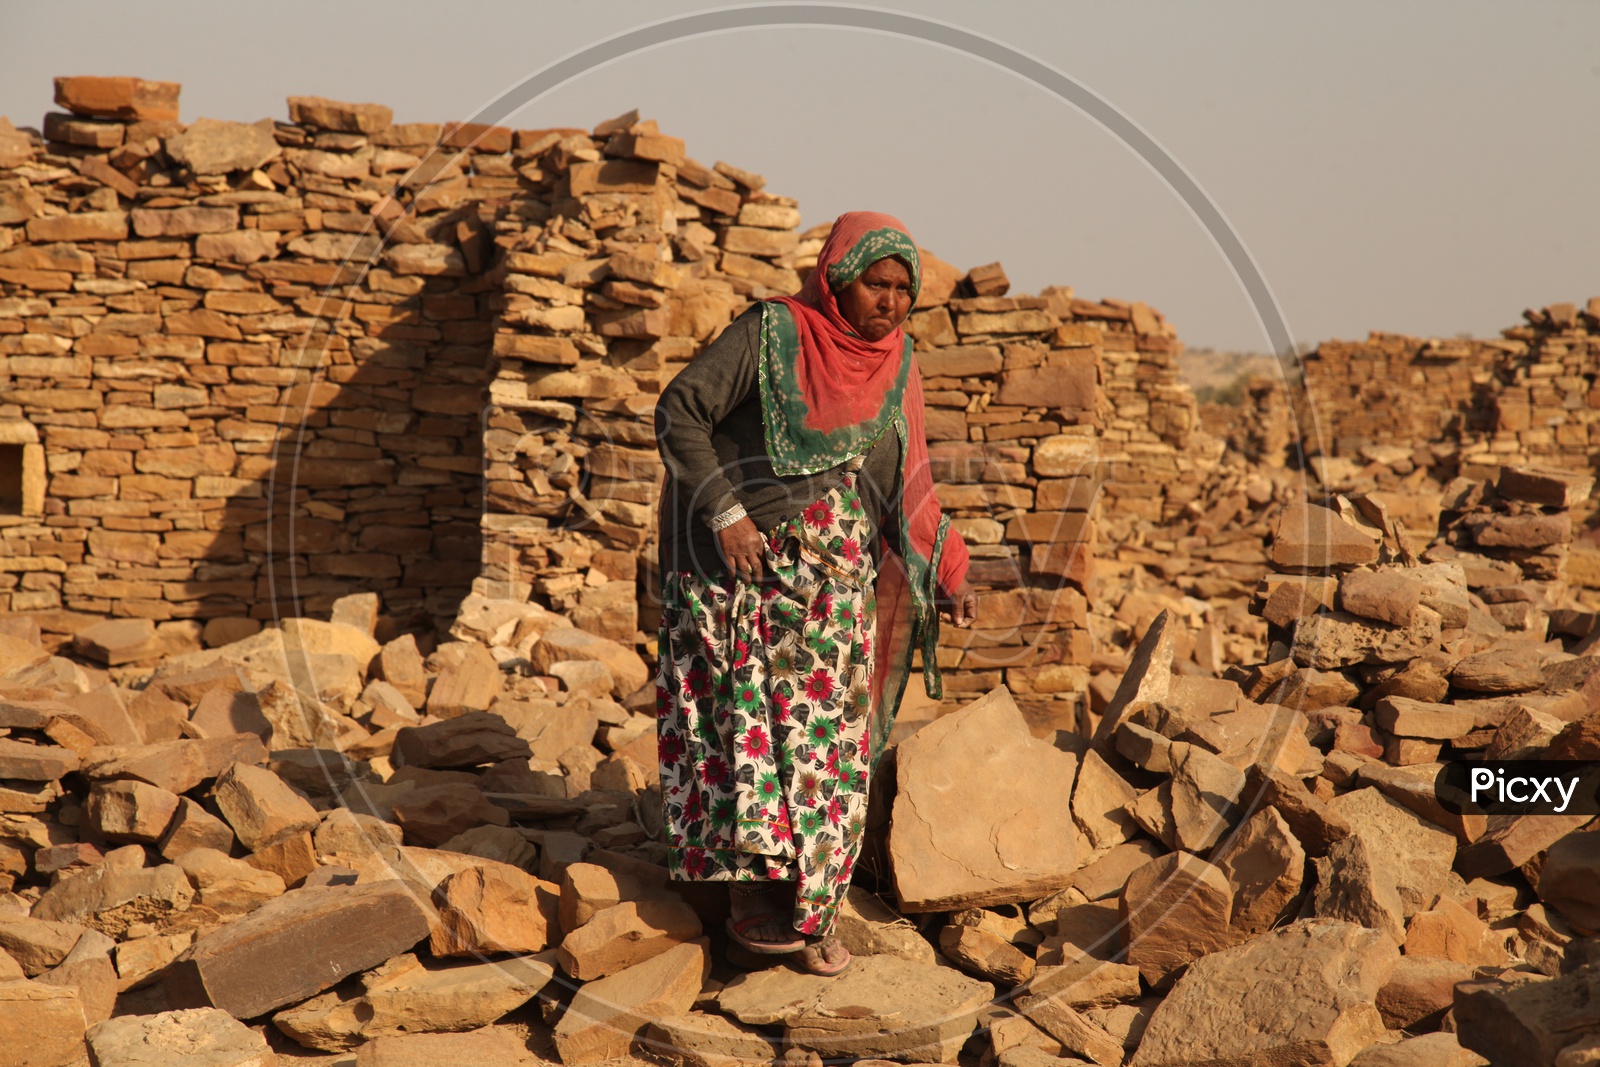 Indian Old woman walking alongside the old ruins